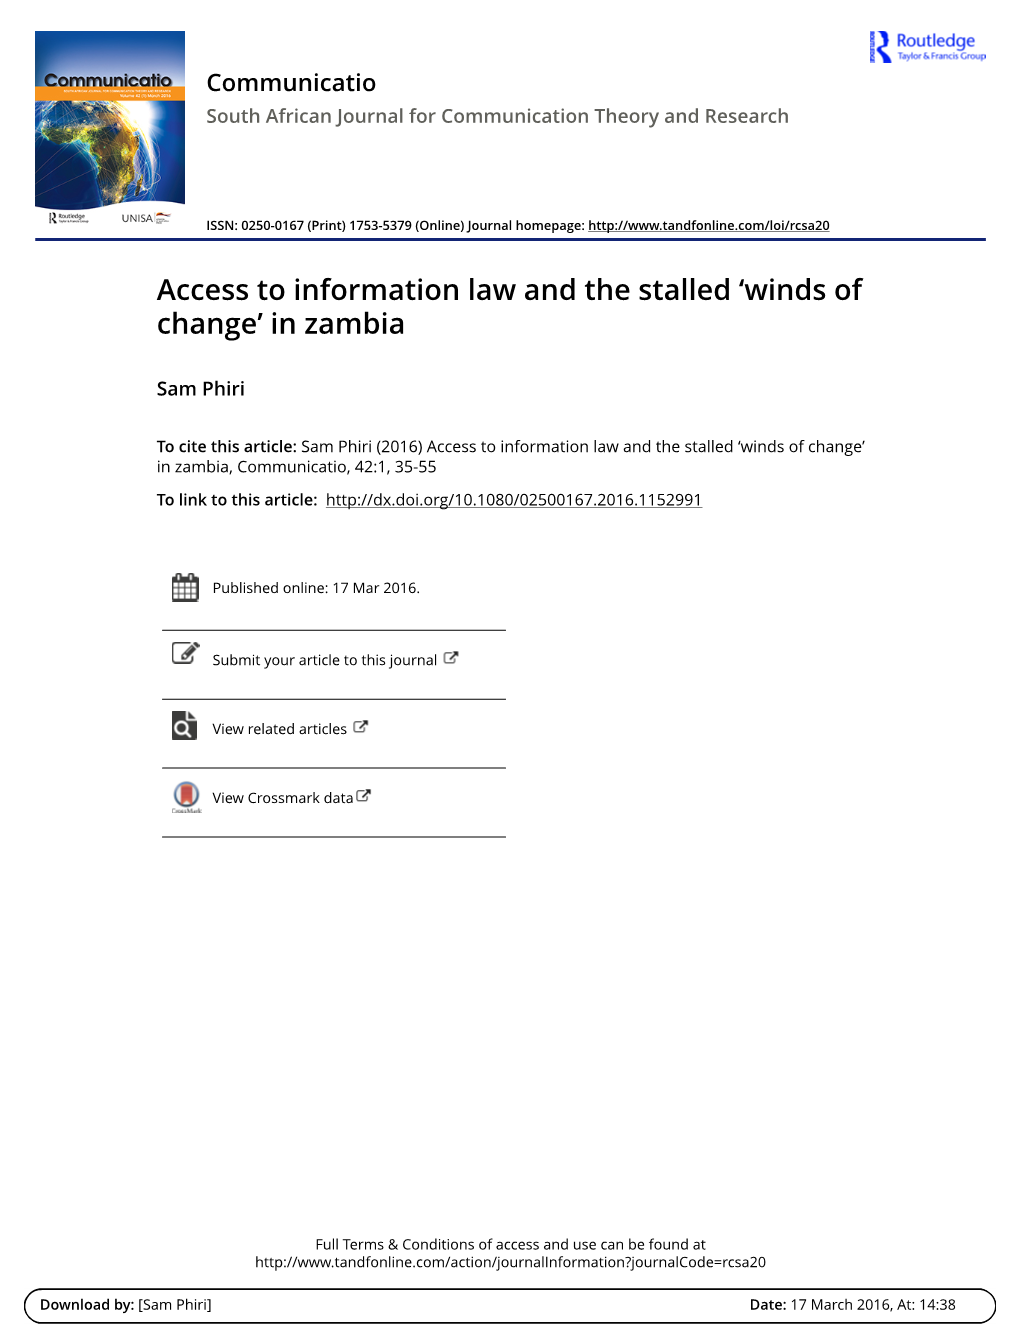 Access to Information Law Published Article-1.Pdf